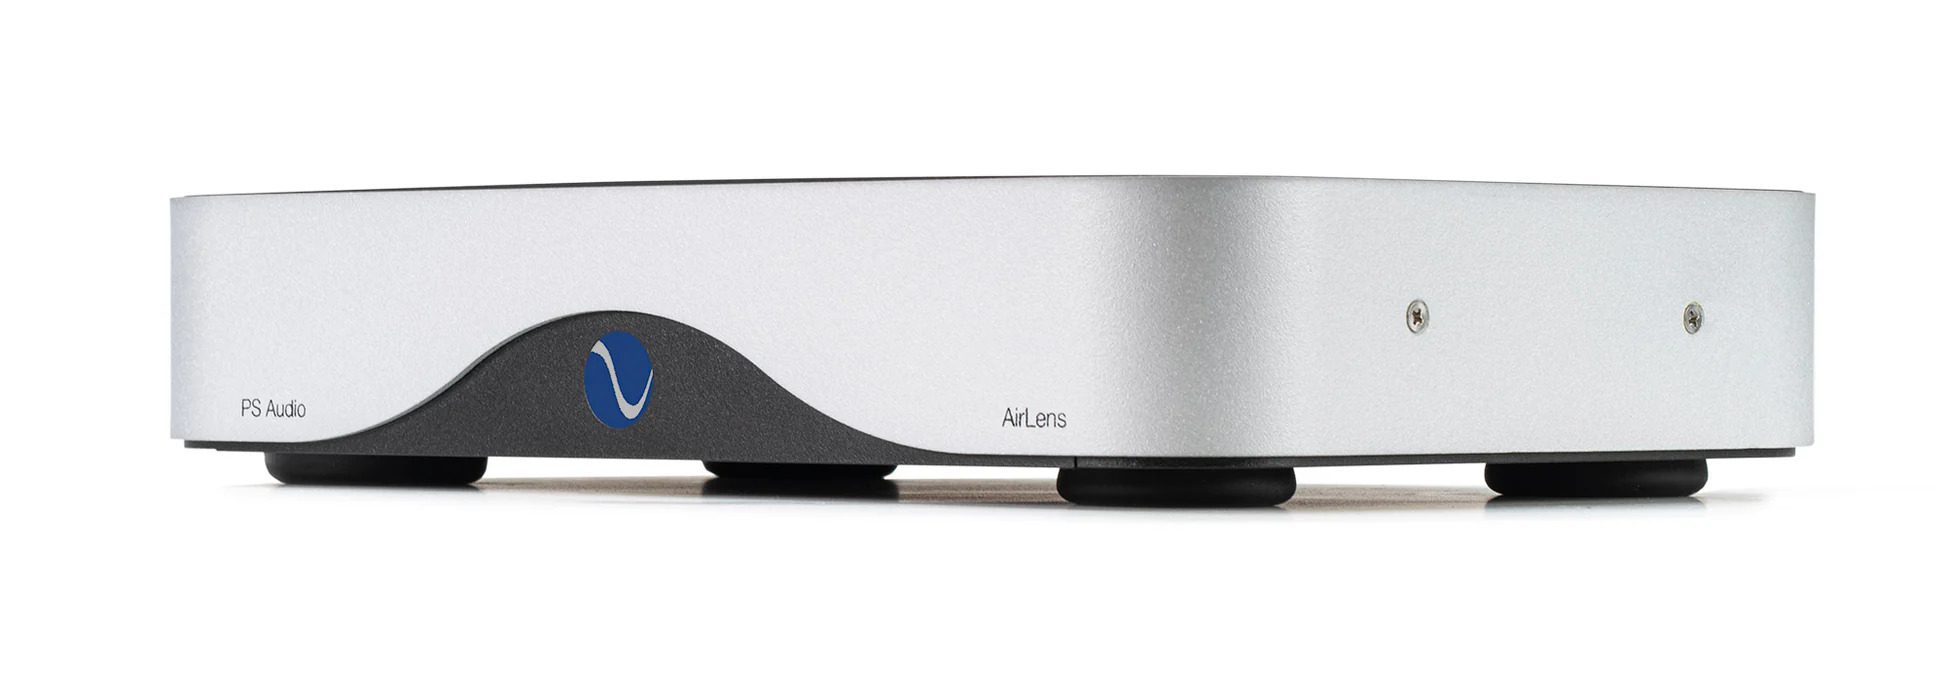 Review: PS Audio AirLens Network Streamer